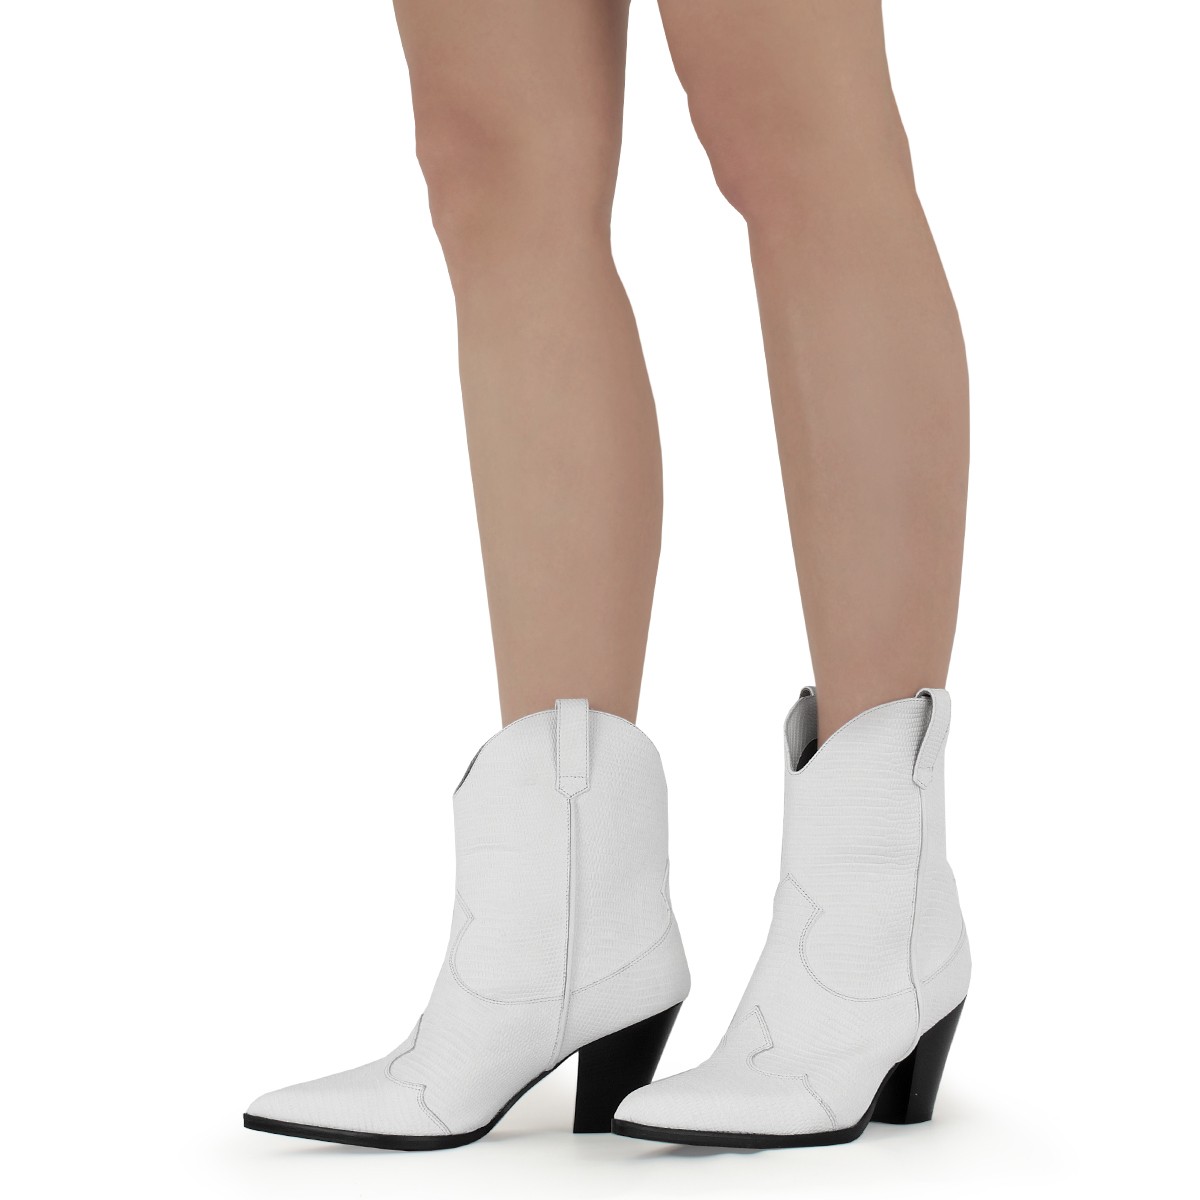 WHITE TEJUS COWBOY-STYLE ANKLE BOOTS